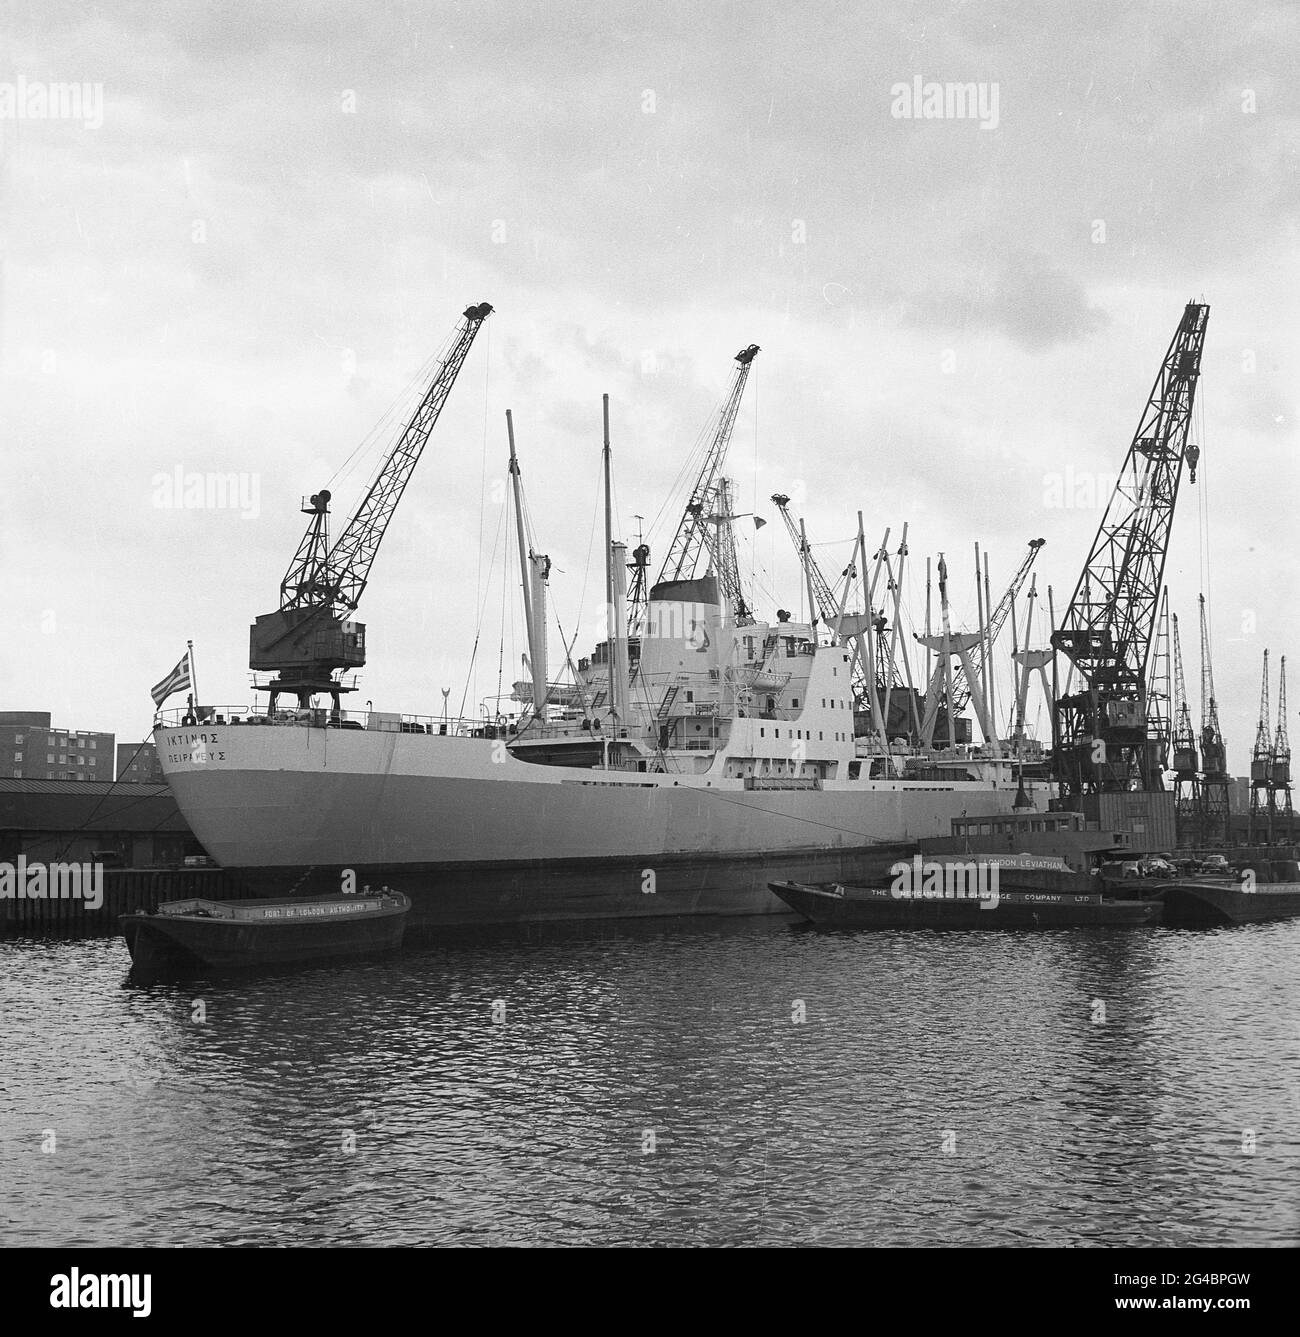 1960s, historical, Greek cargo ship, 'IKTINOS' moored at Tilbury Docks on  tthe river Thames at Tilbury Essex, England, UK, a part of the wider Port of London. Beside it, the PLA floating crane, London Leviathan, a self-propelled crane barge, built in Amsterdam in 1965 for the Port of London Authority.  Also seen is a tug of the Mercantile Lighterage Co. The cargo ship IKTINOS was built in July 1969 by Doxford & Sunderland Shipbuilding & Engineering Co., Ltd., Sunderland, UK, for Lineas Interoceanicas S.A. under the Greek flag. Stock Photo